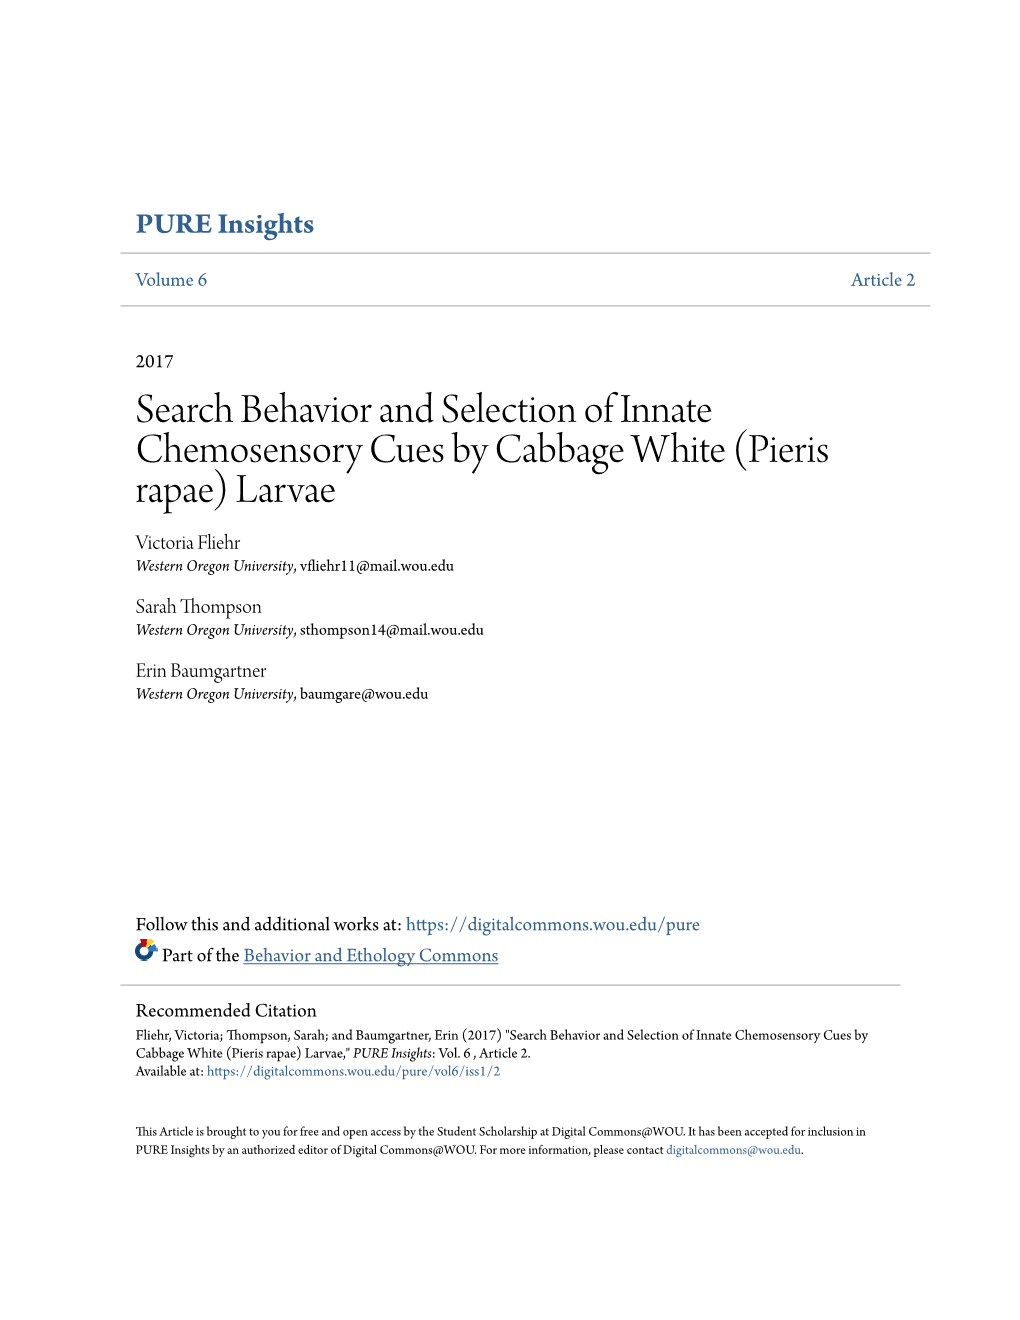 Search Behavior and Selection of Innate Chemosensory Cues by Cabbage White (Pieris Rapae) Larvae Victoria Fliehr Western Oregon University, Vfliehr11@Mail.Wou.Edu